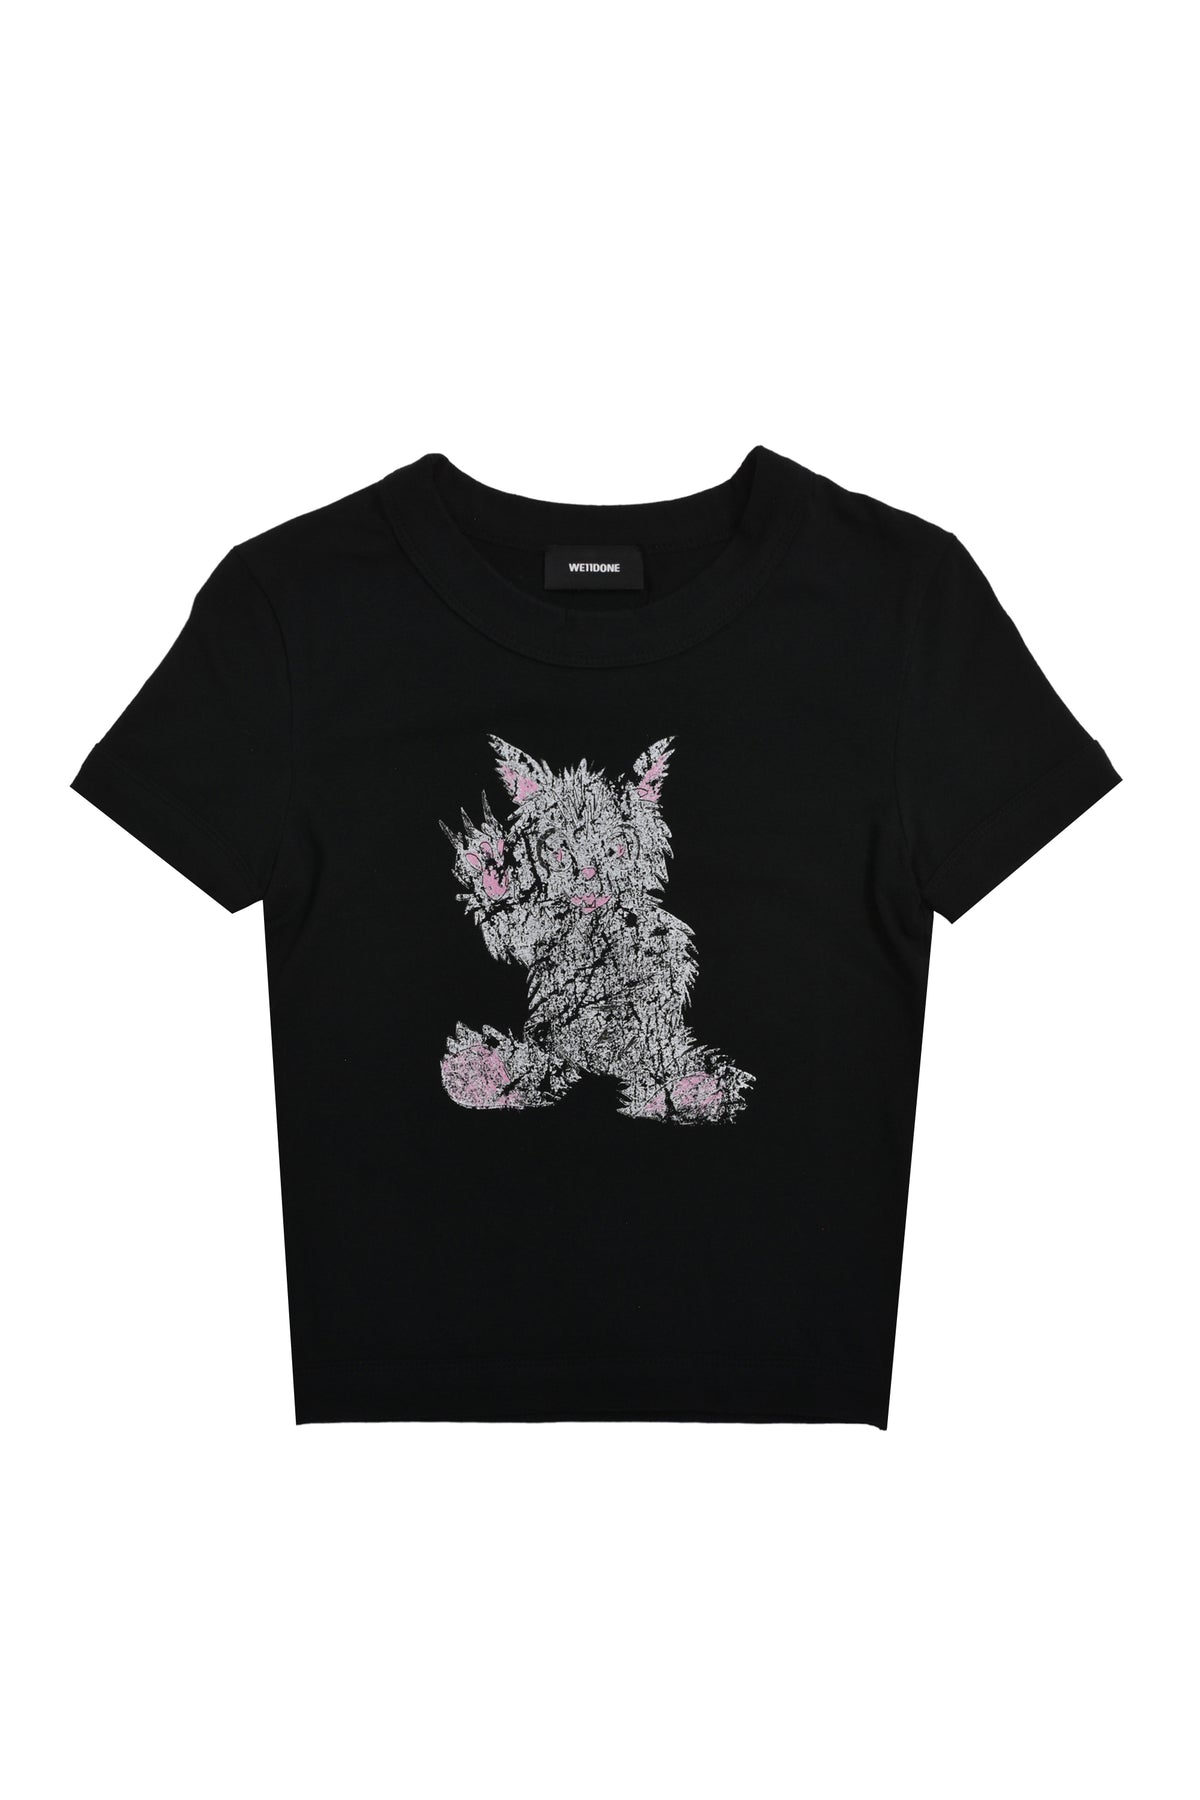 BLACK WOMENS DOODLE MONSTER PRINT FITTED T-SHIRT / BLK